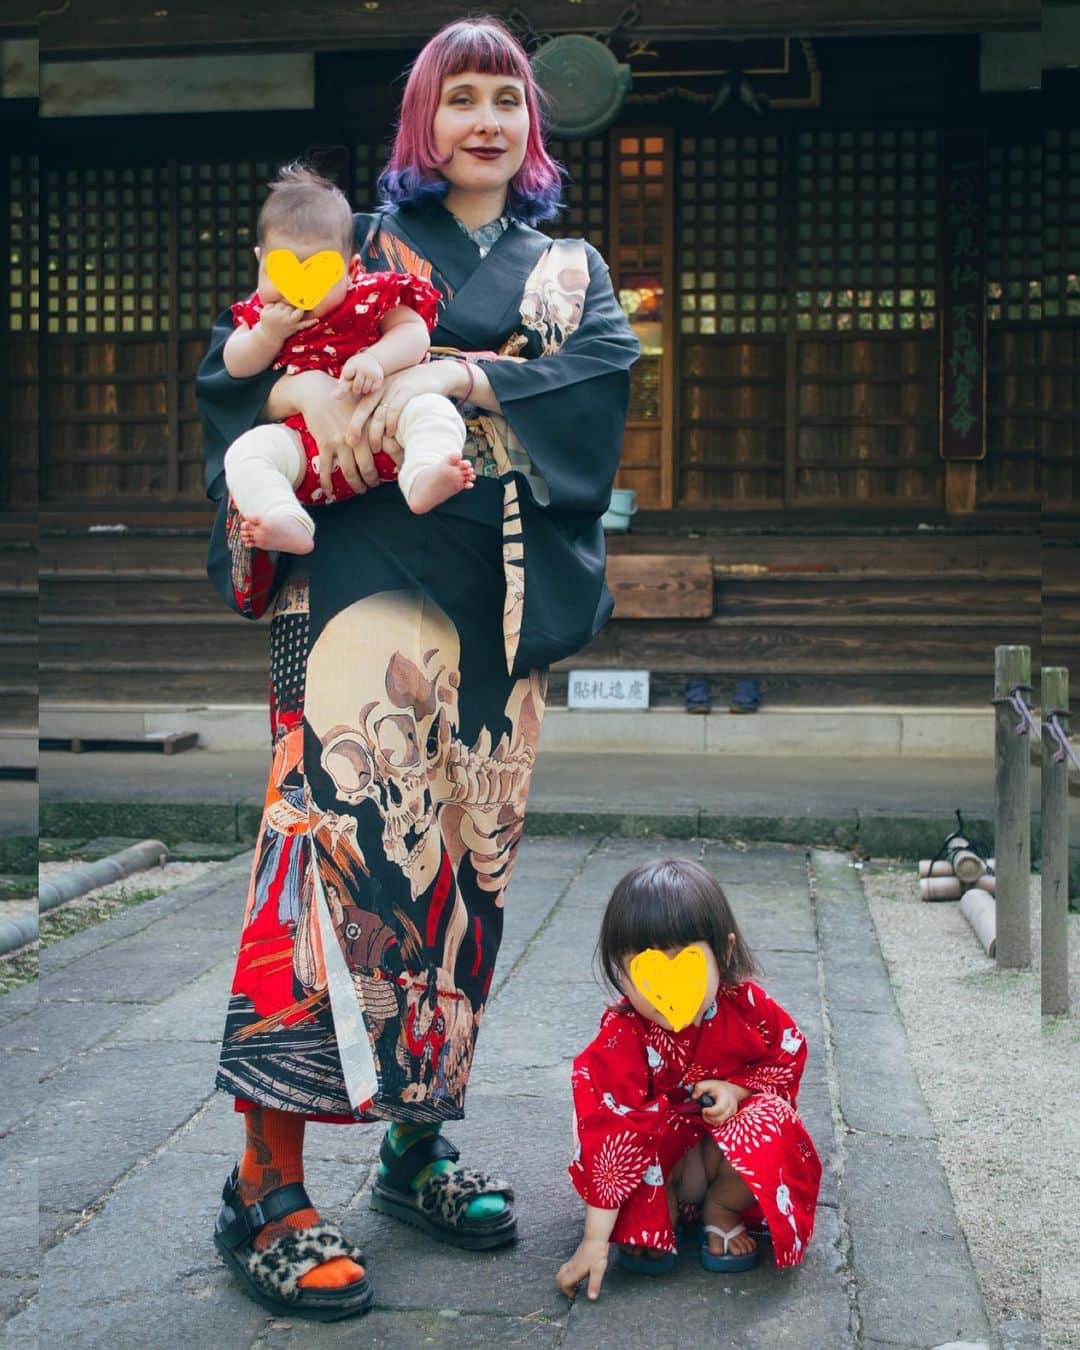 Anji SALZのインスタグラム：「So proud and happy to go out in kimono with my babies 👶🏻 I know I don’t do it as often as when I was without kids, but when I do, it feels even more special to share this bit of Japanese culture with them. 👘❤️ Here is to hoping that they will grow up loving kimono as well!   Last picture is a bonus to see how trashy the kitsuke really looks after juggling kids all day 😅😂  Thank you for the wonderful time @kimono_keisatsu 🥳  子供たちと着物で出かけるととても嬉しいです❤️ 和装を着る時間が減ってしまったけど、、😭　この2人も着物好きになるといいね。  そして最後の写真は子育て中のリアルな姿ww着付けはボロボロ😂😂  #kimono #japanesekimono #ootd #momsofinstagram #momstyle #kidskimono #japan #着物コーディネート #子育てを楽しむ #和装 #ママコーデ #着物生活 #普段着物」